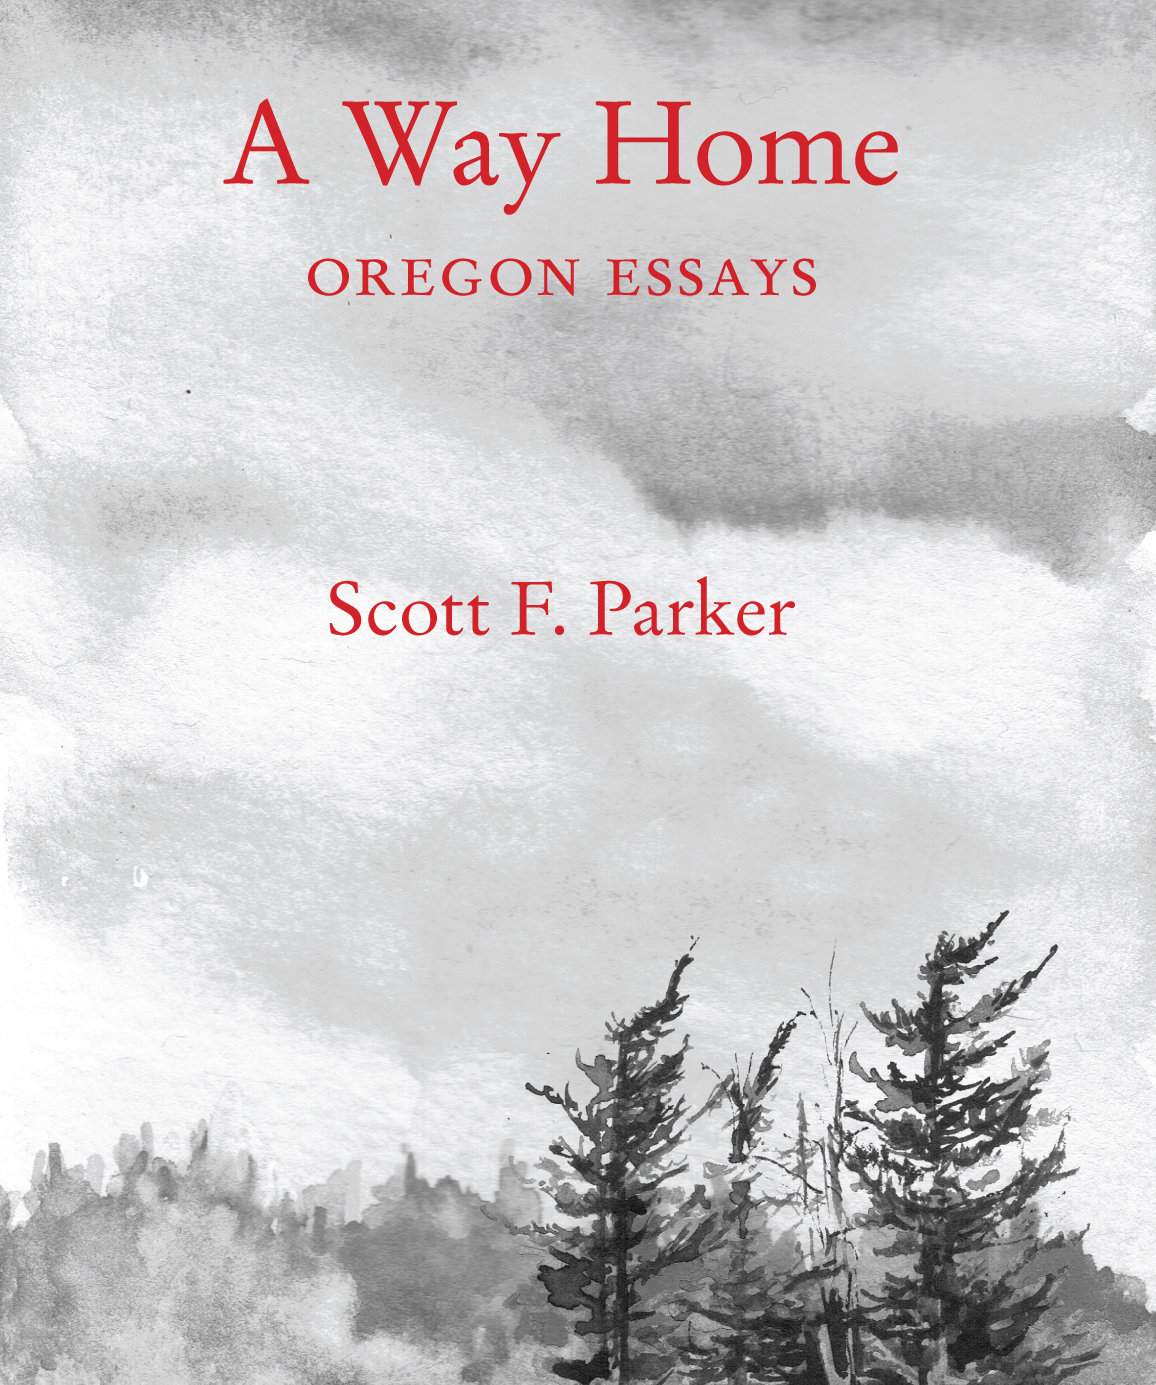 A Way Home Sold by Kelson Books